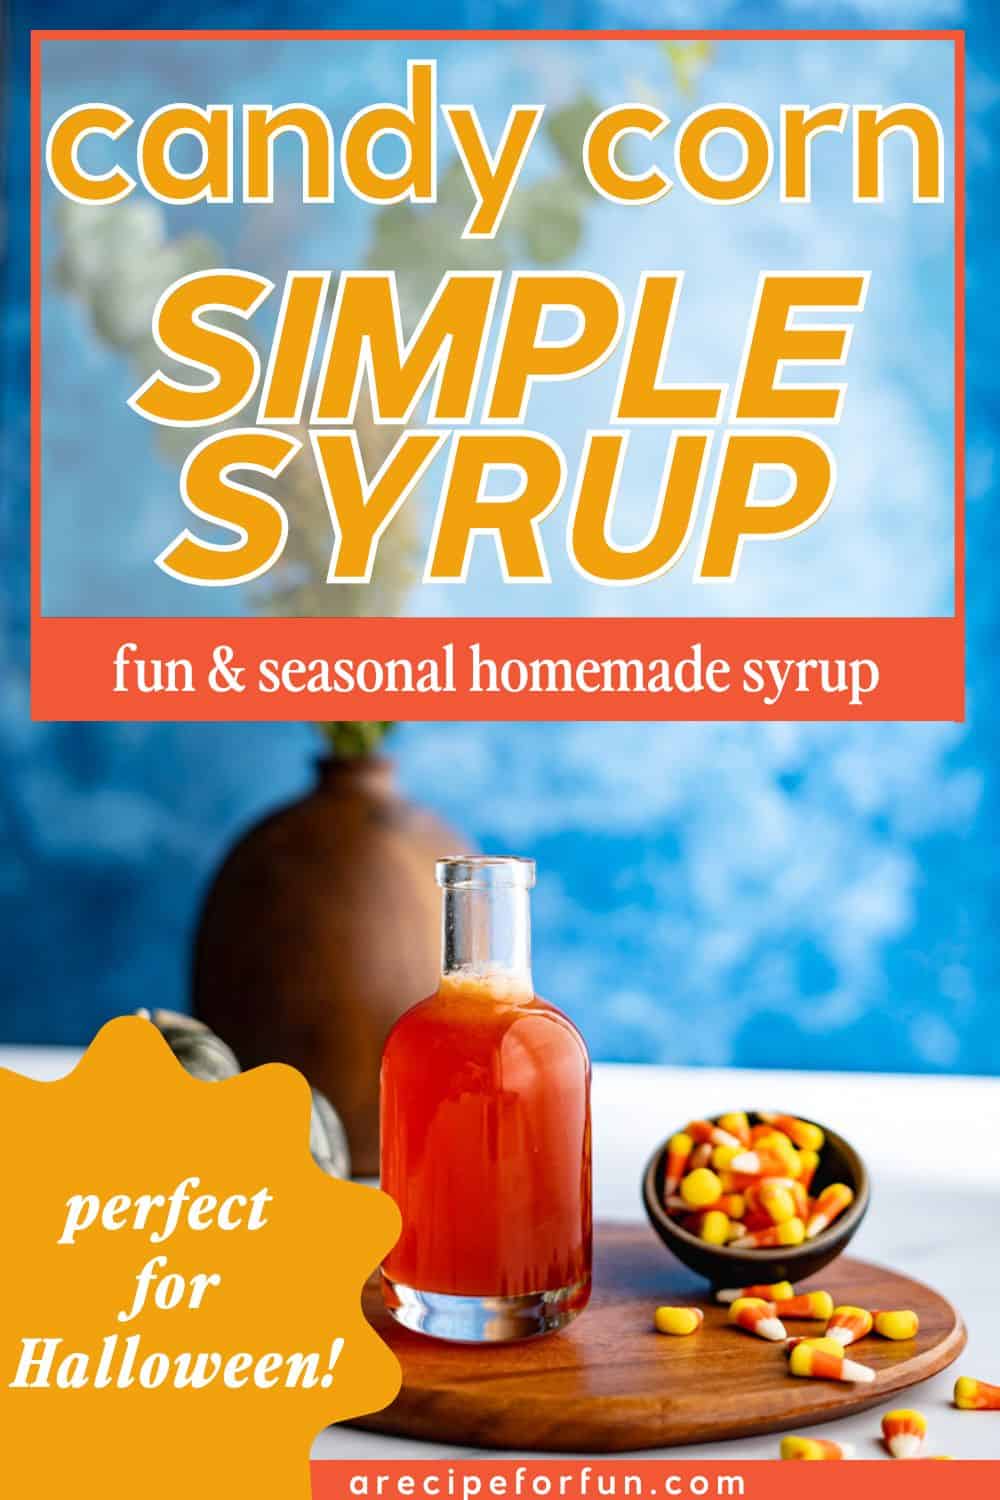 Pinterest Pin for candy corn simple syrup.